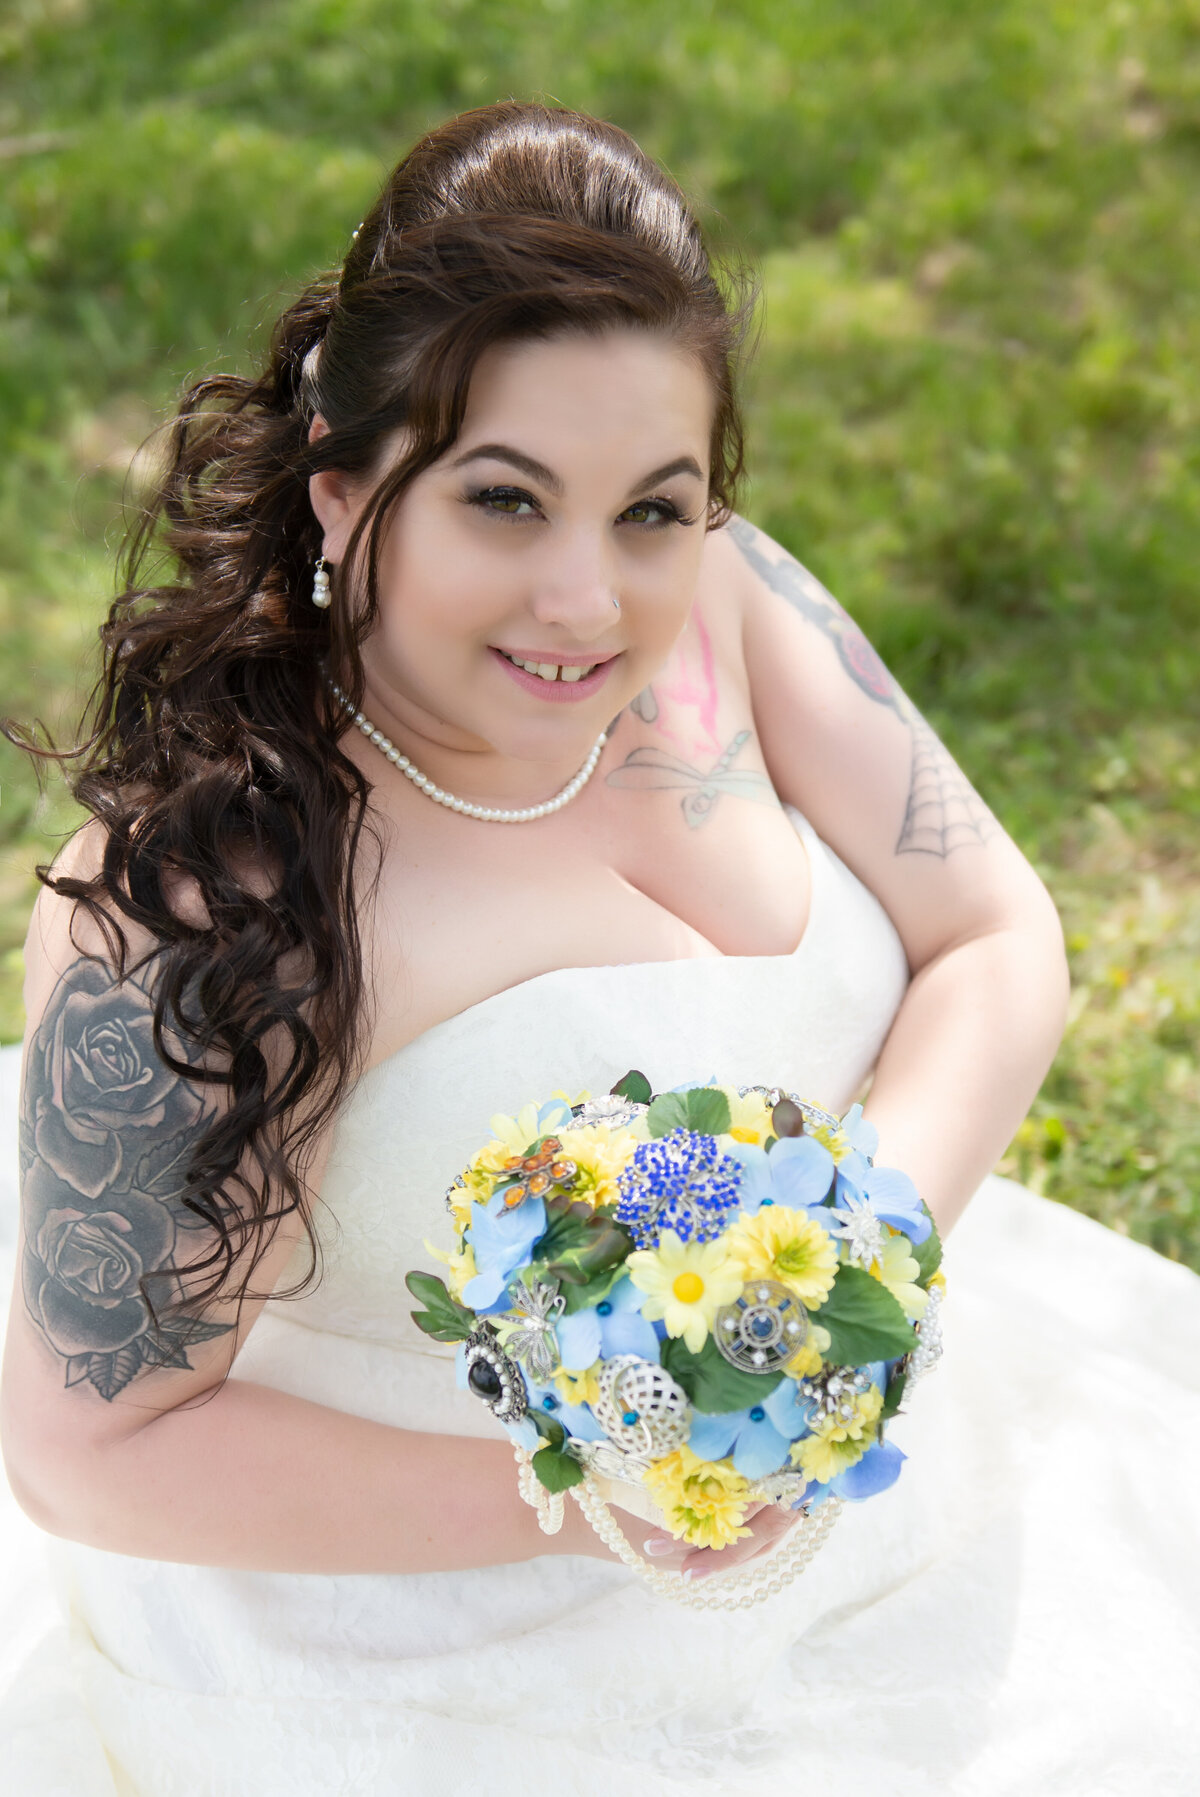 Bridal portrait on her wedding day with bouquet